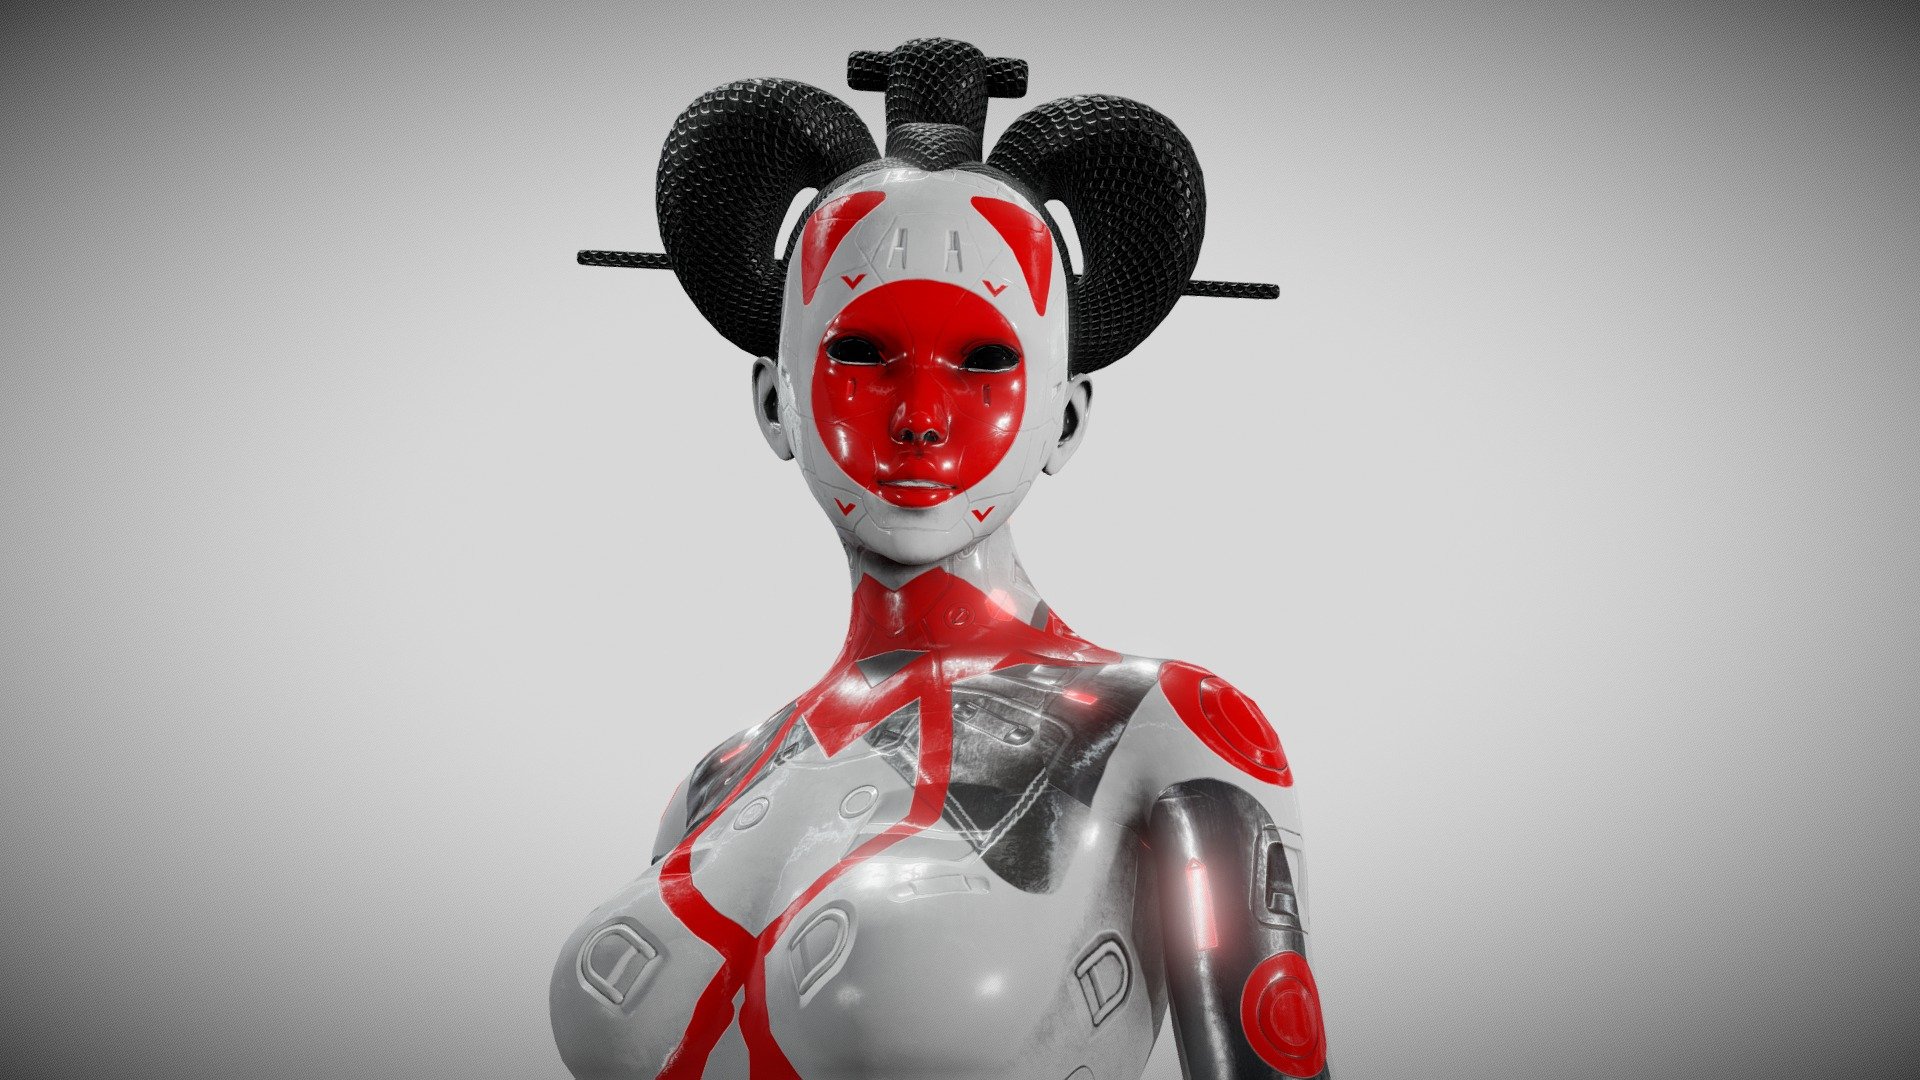 CYBER GEISHA v1 BY OSCAR CREATIVO All rights reserved www.oscarcreativo.co

Full Proyect:https://www.artstation.com/artwork/bKN3Zr

Attach additional file: BLENDER POSE T TEXTURES RIGGING
TEXTURES PBR 2K. 4K
RIGGING**

**If you need support write to my email creagraf@hotmail.com
**



 - CYBER GEISHA By Oscar creativo - Buy Royalty Free 3D model by OSCAR CREATIVO (@oscar_creativo) 3d model